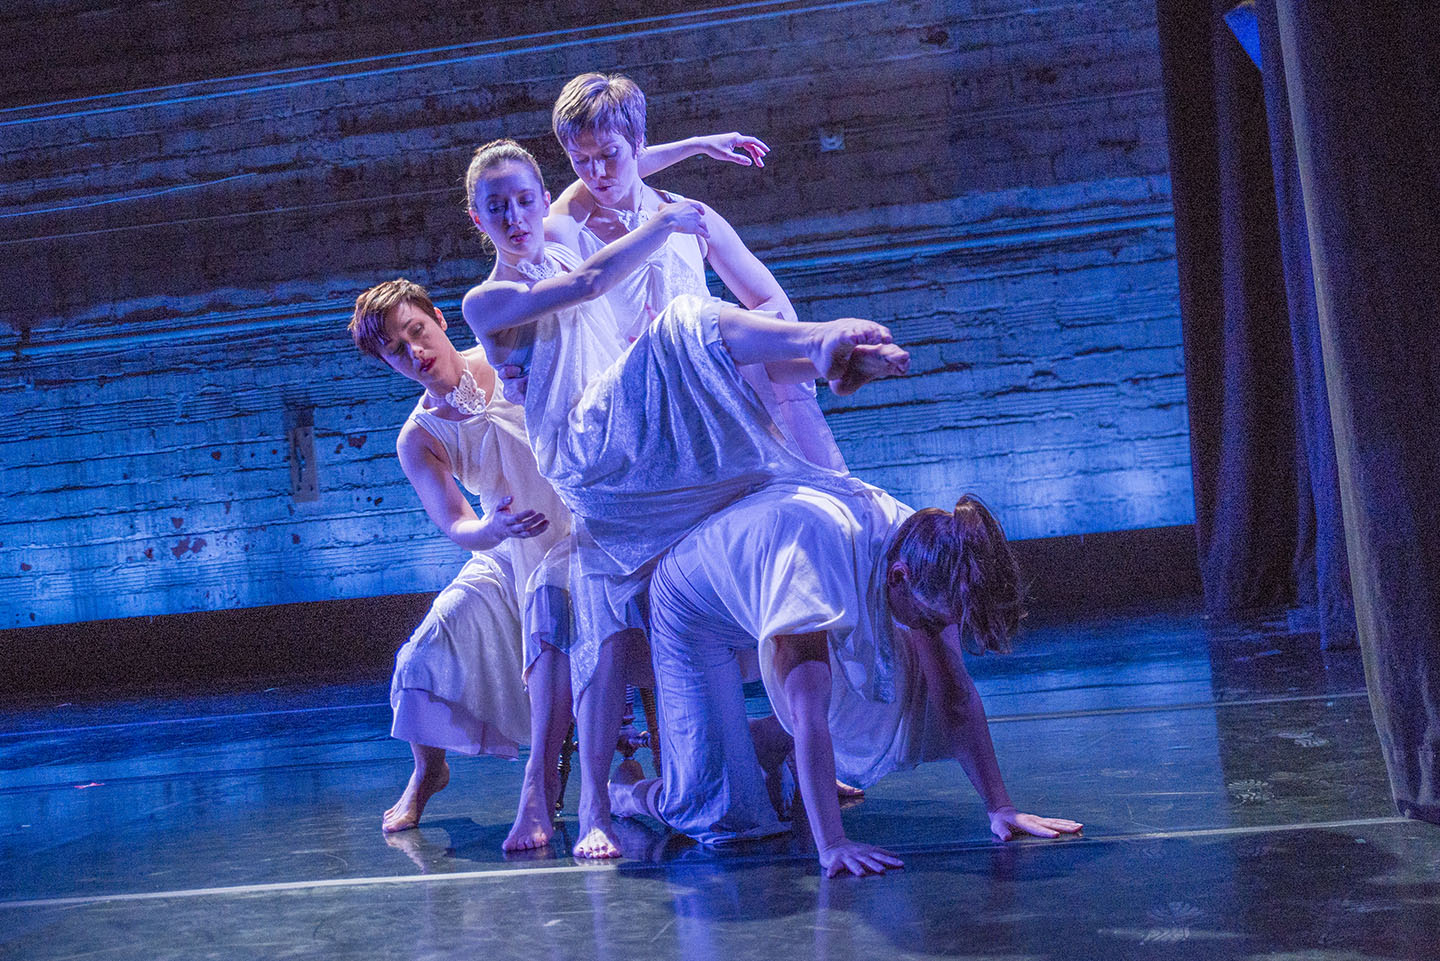 Image of 4 MorrisonDancers in front of a blue background wearing white gowns